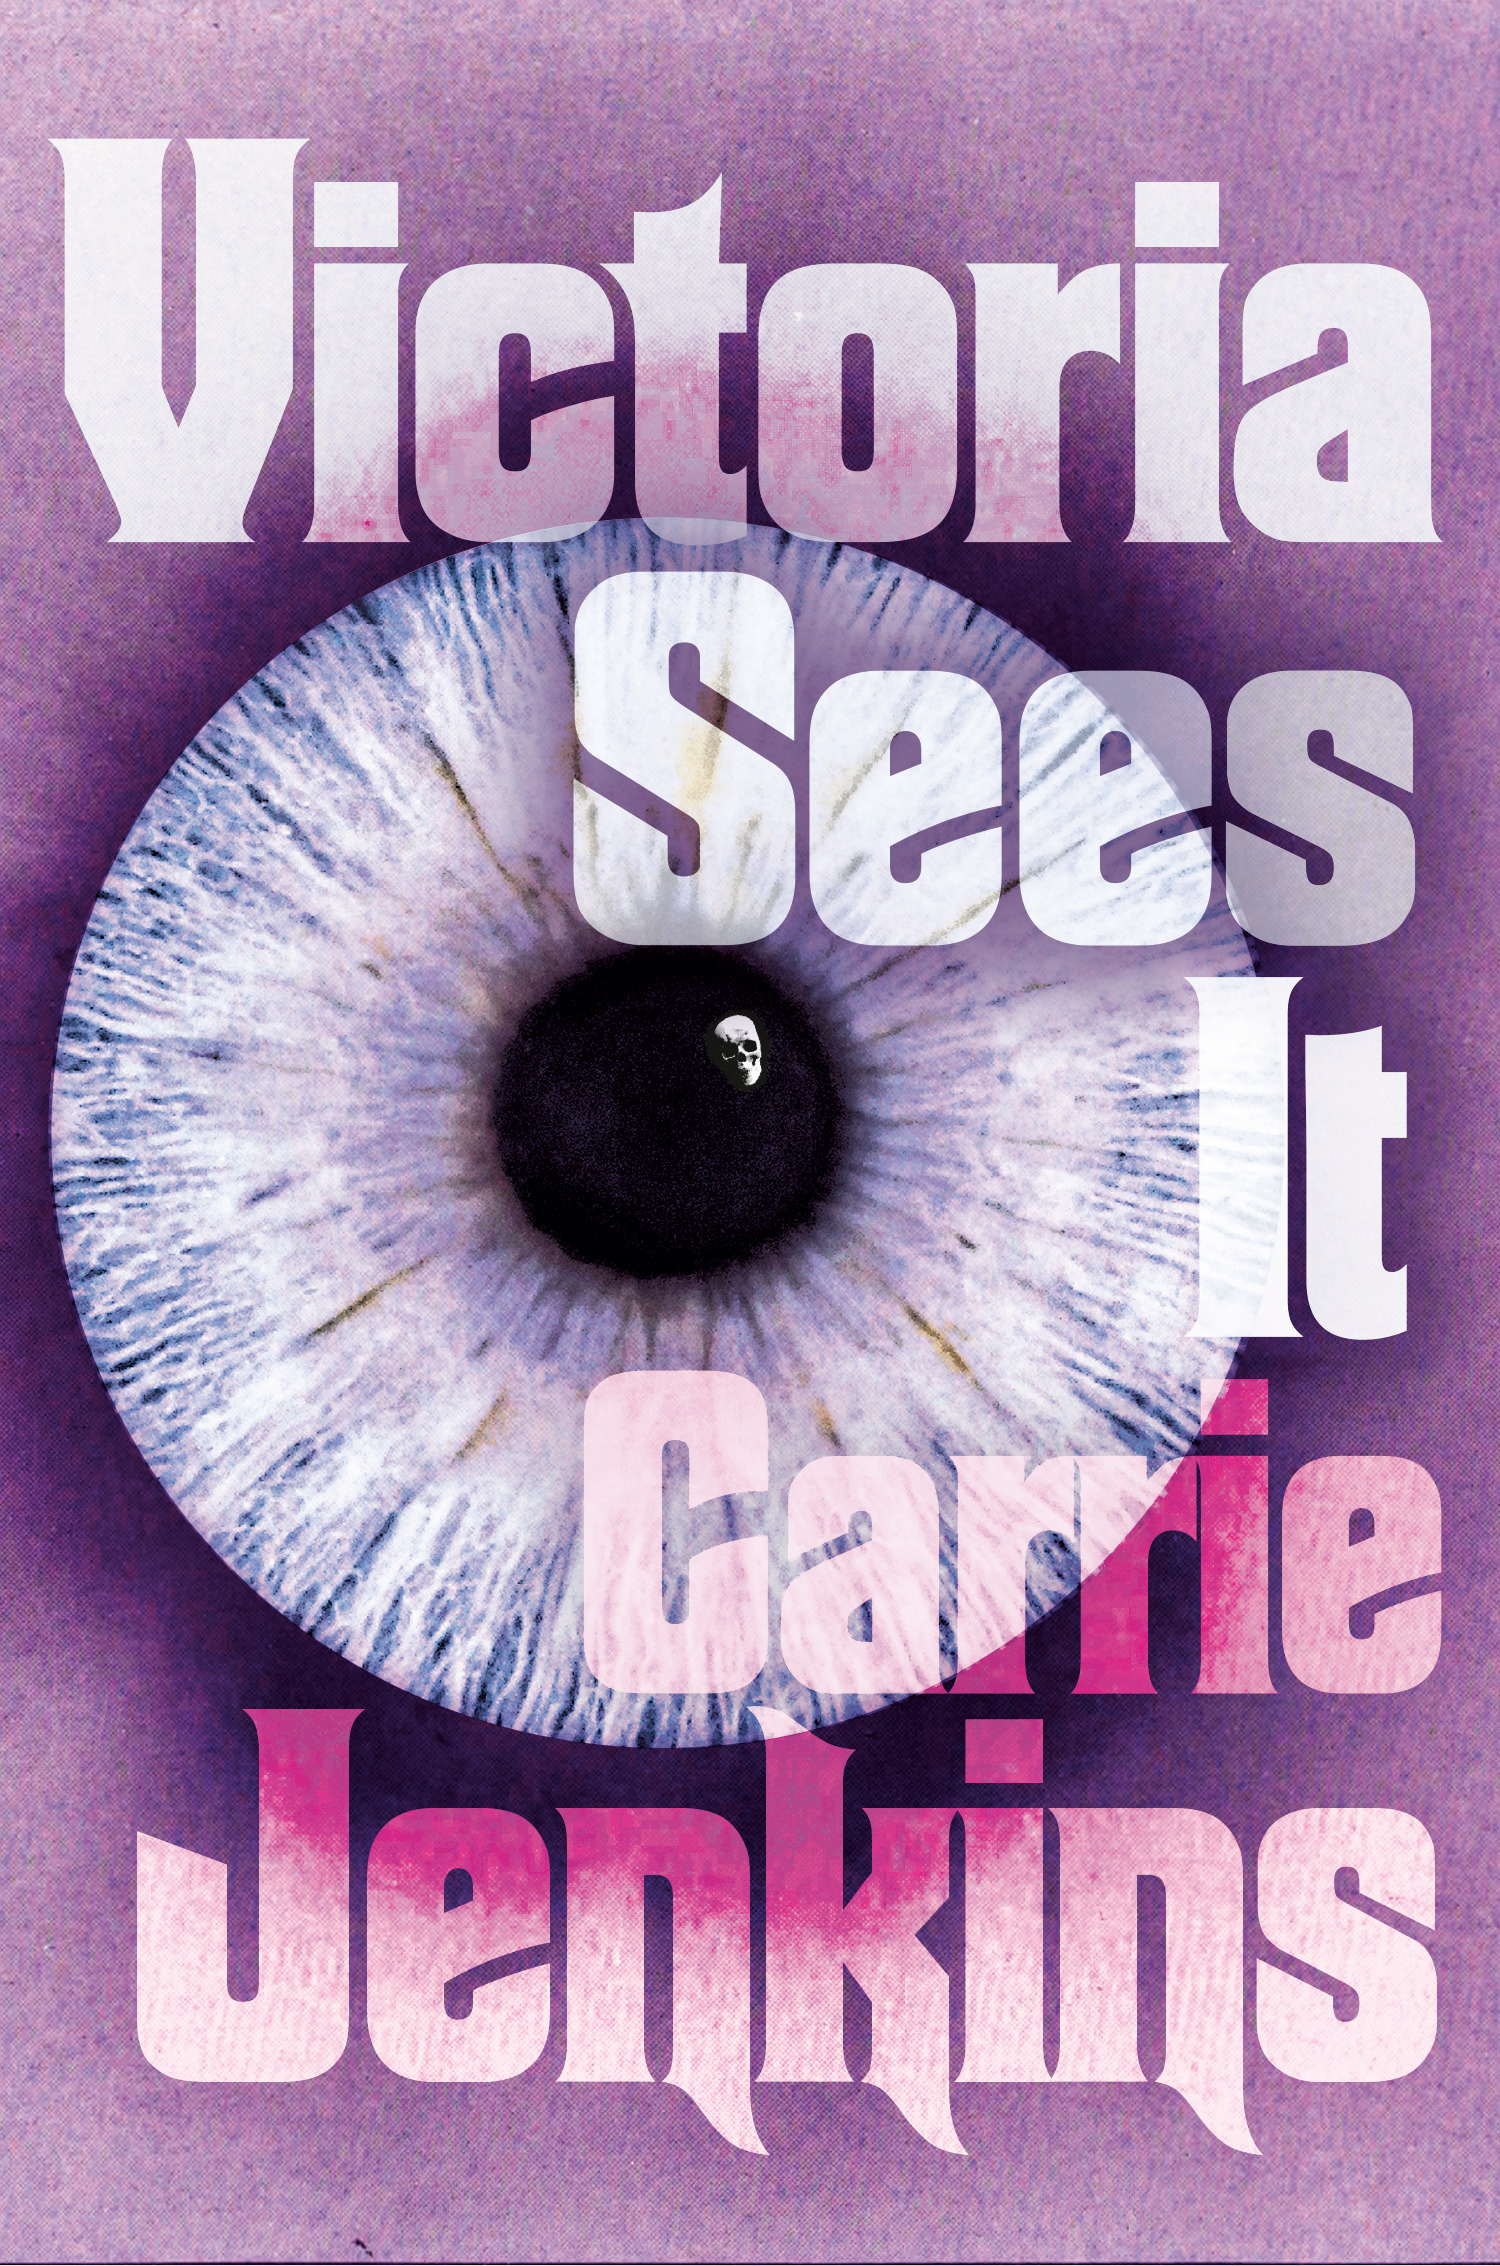 Victoria Sees It | Jenkins, Carrie